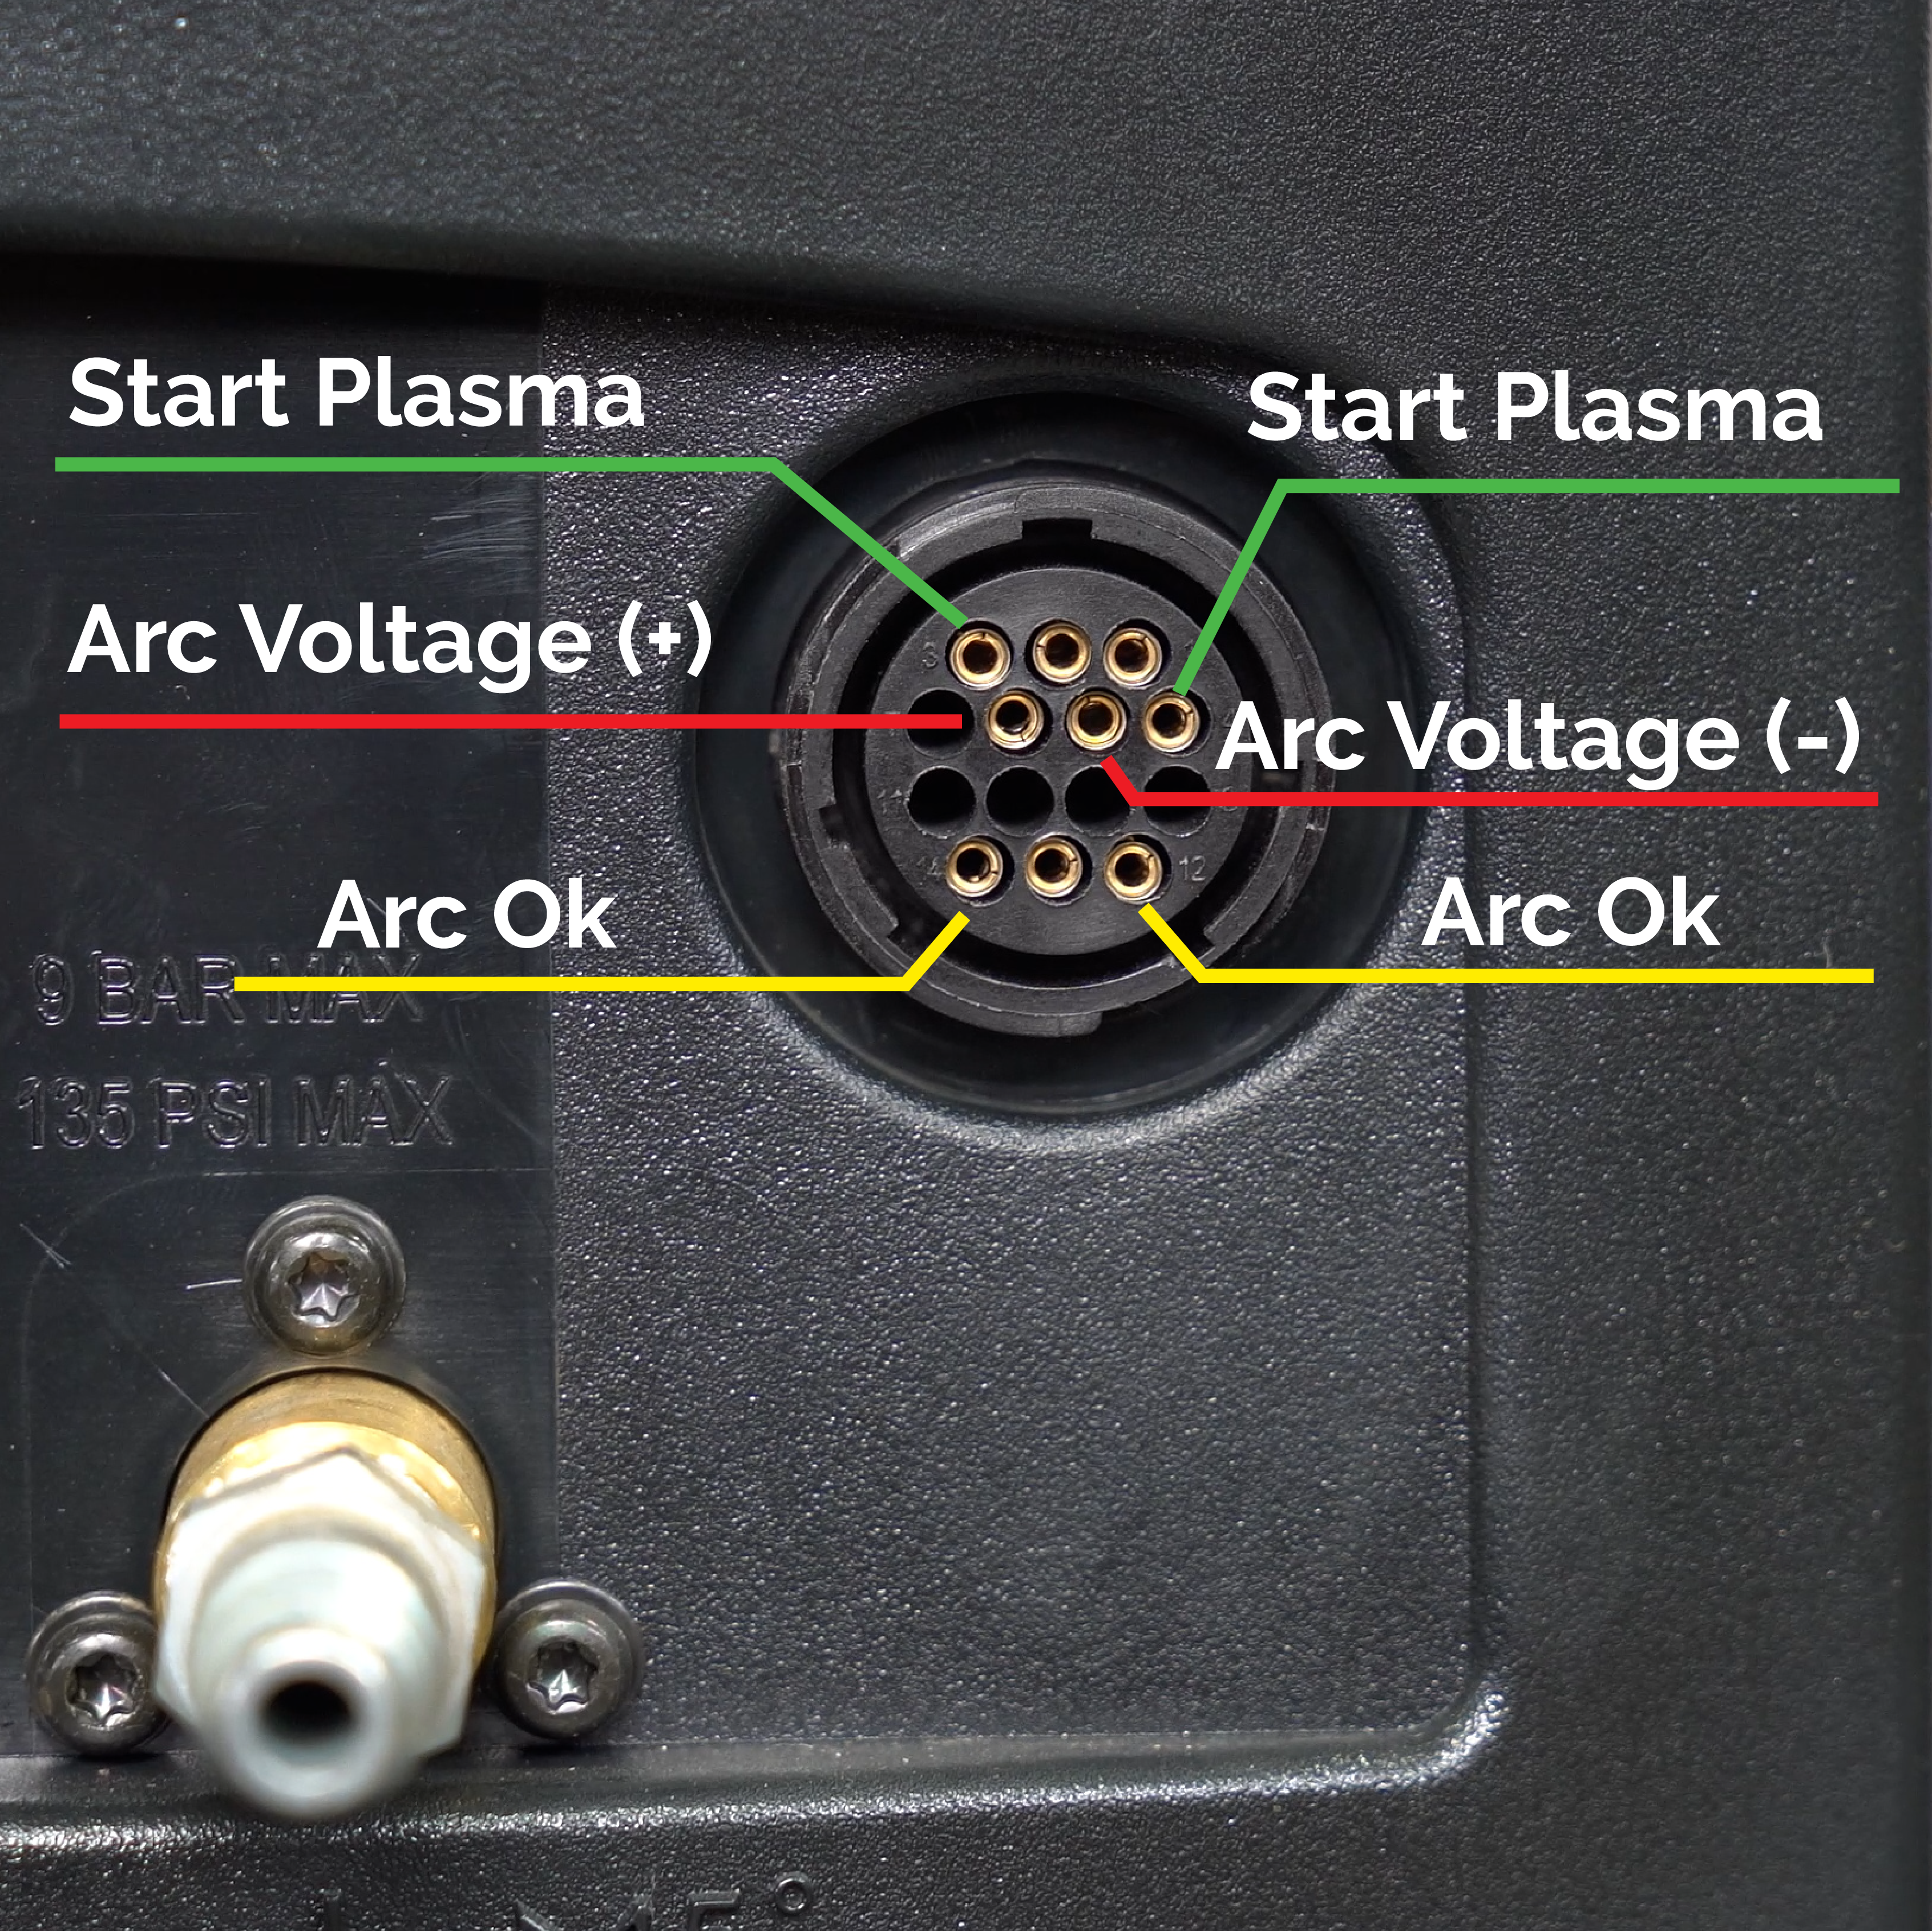 CNC port/connector on the back of plasma cutter labeled with start/trigger, arc voltage, and arc ok signals.